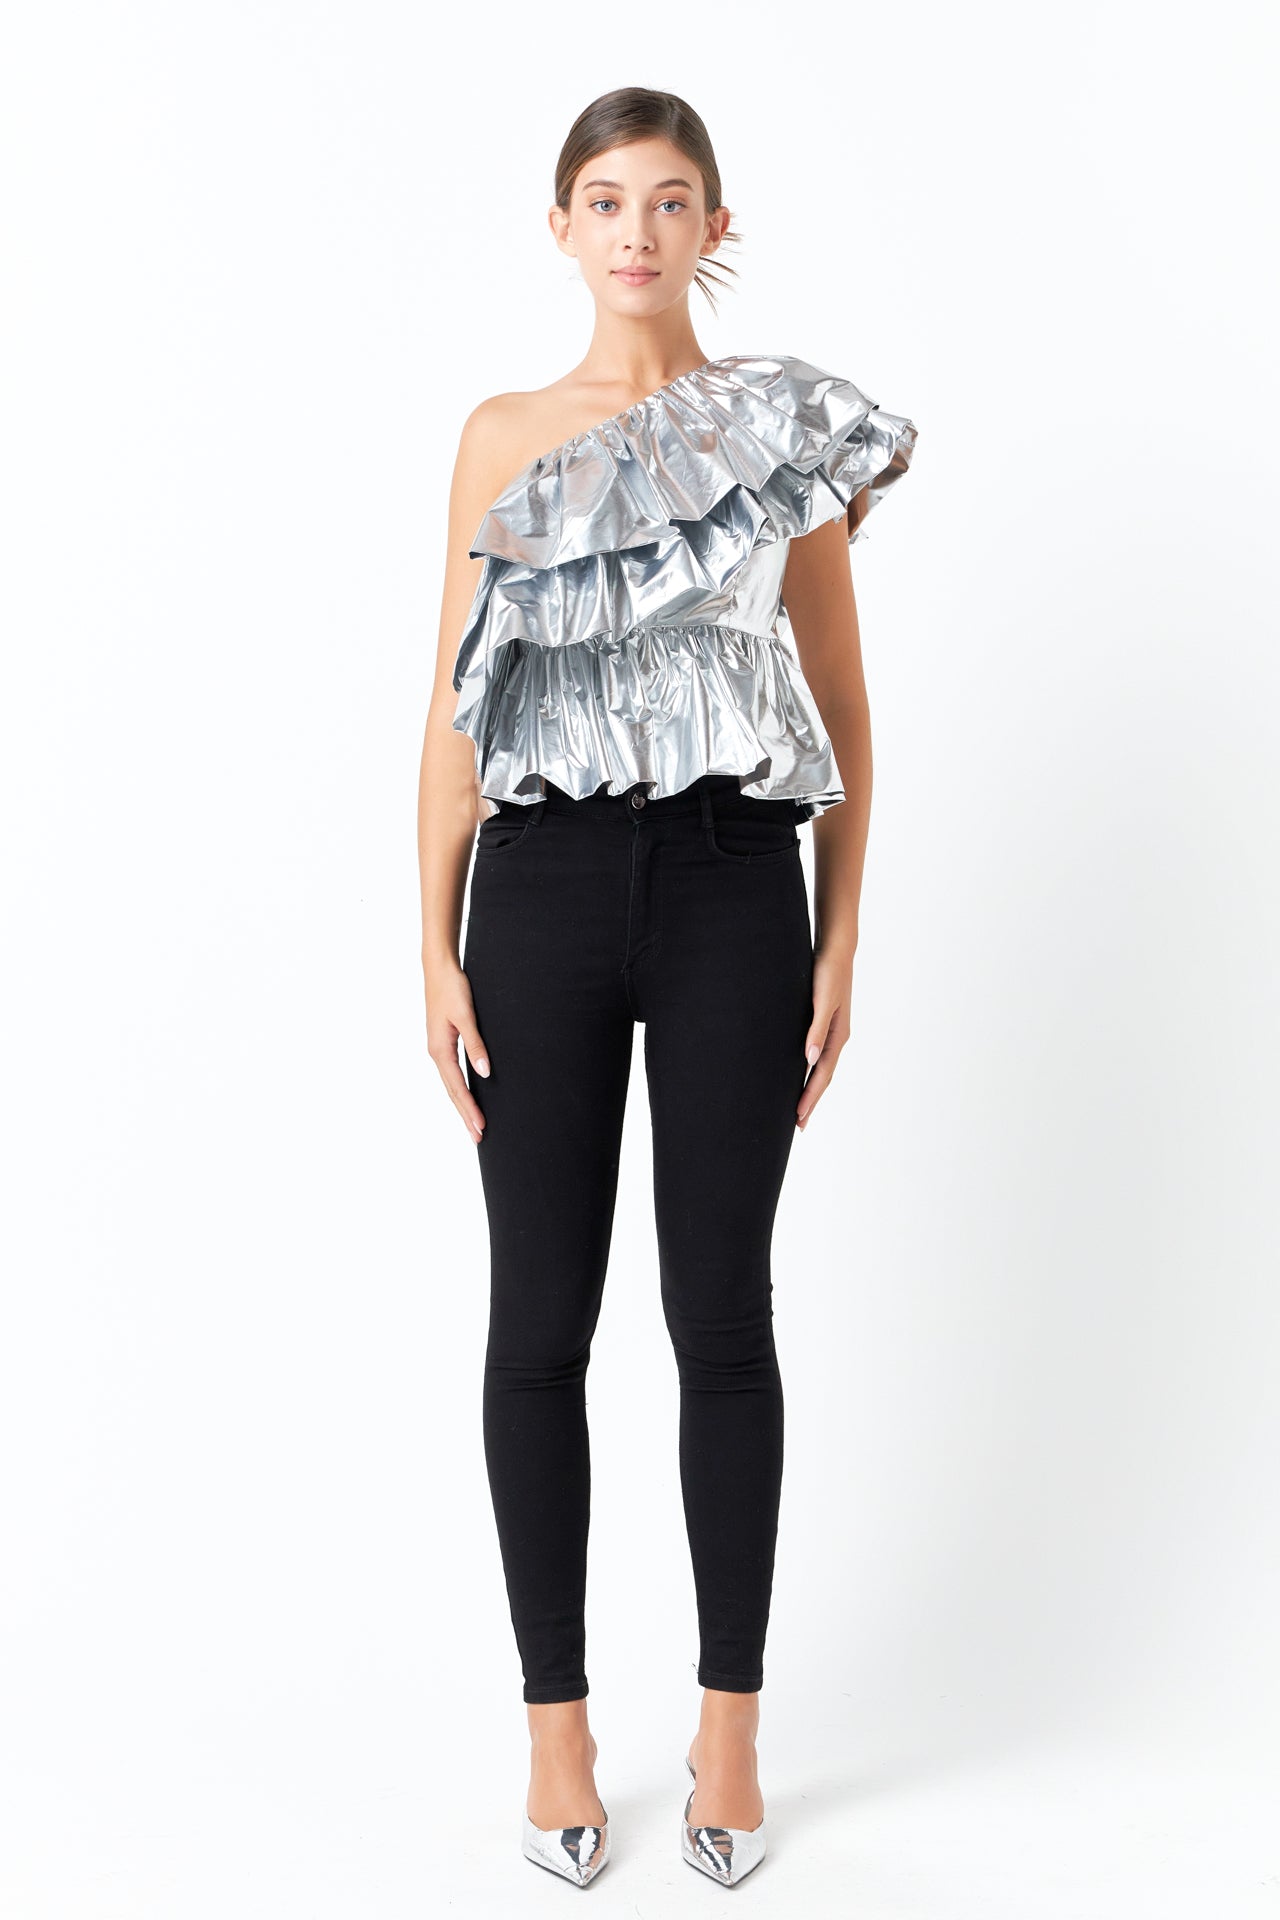 Endless Rose - Metallic Tiered Top - Tops in Women's Clothing available at endlessrose.com